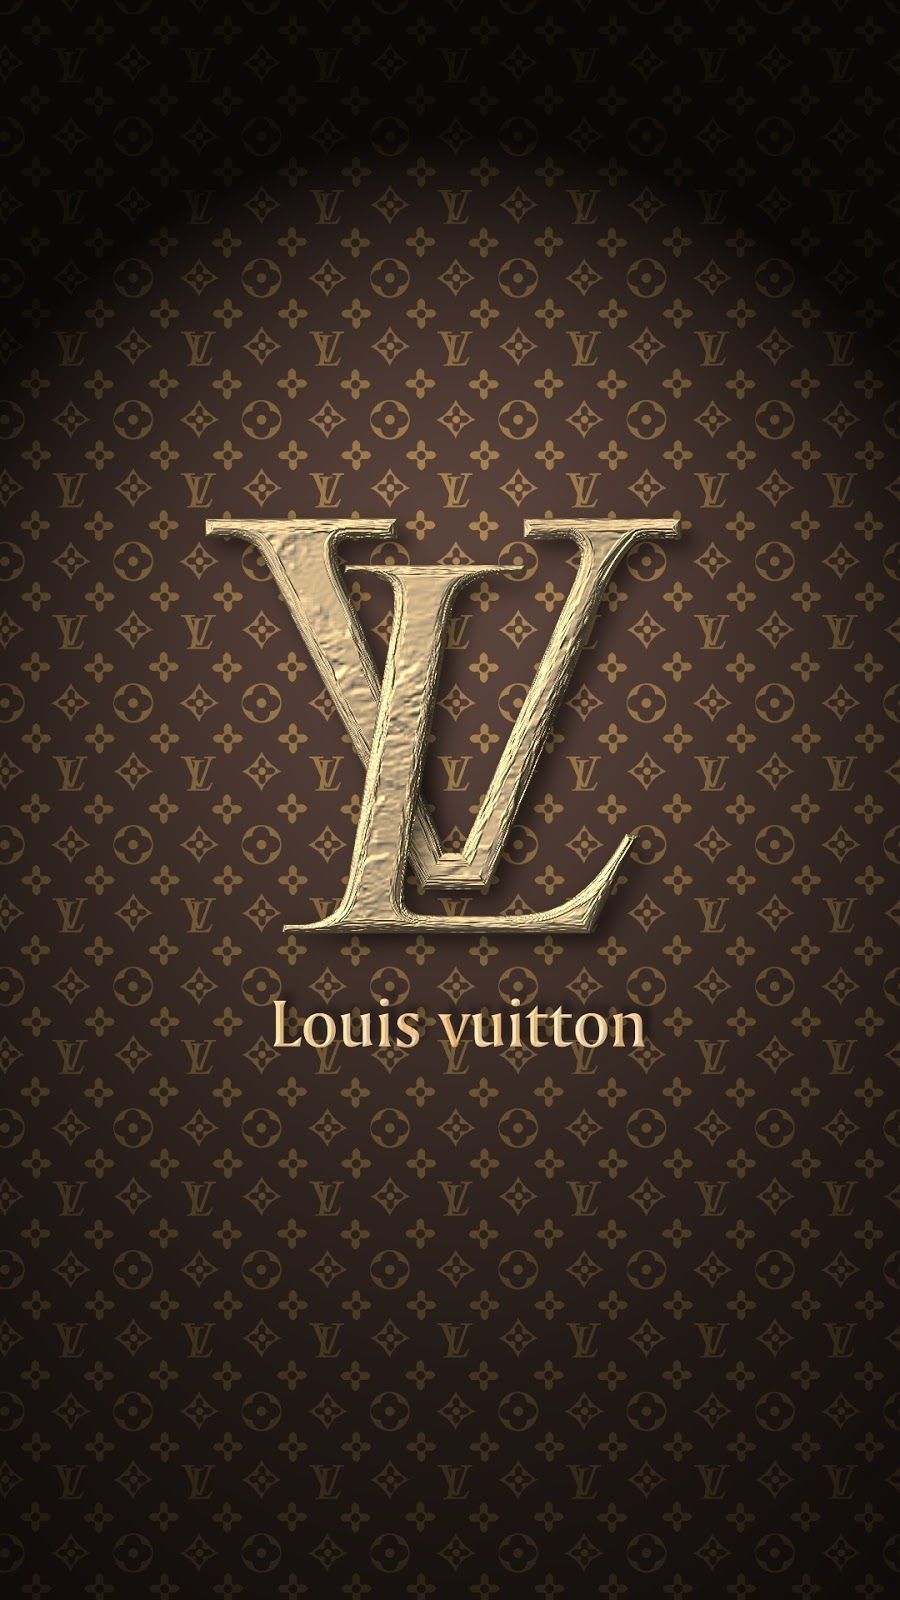 LV Louis Vuitton HD Wallpaper Apk Download for Android- Latest version 1.0-  com.andromo.dev707059.app777719